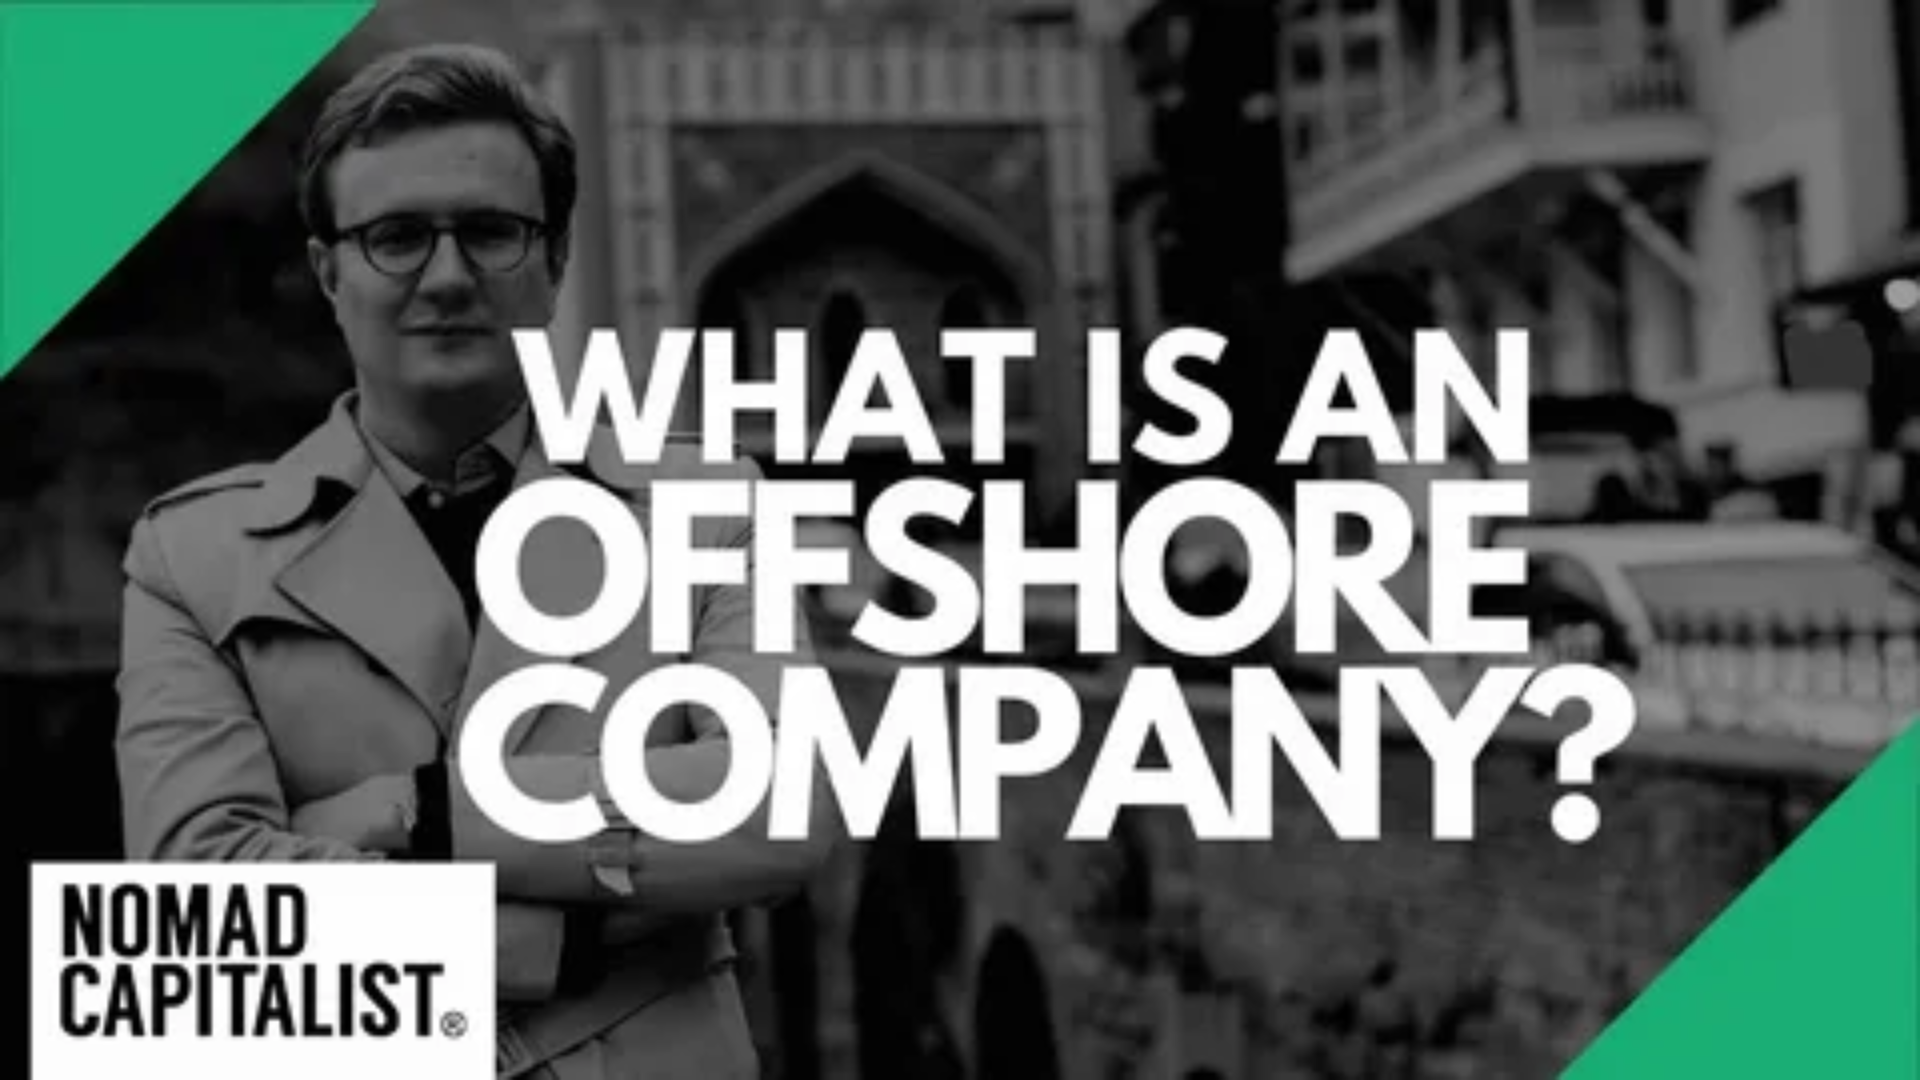 Cheapest Offshore Company Formation